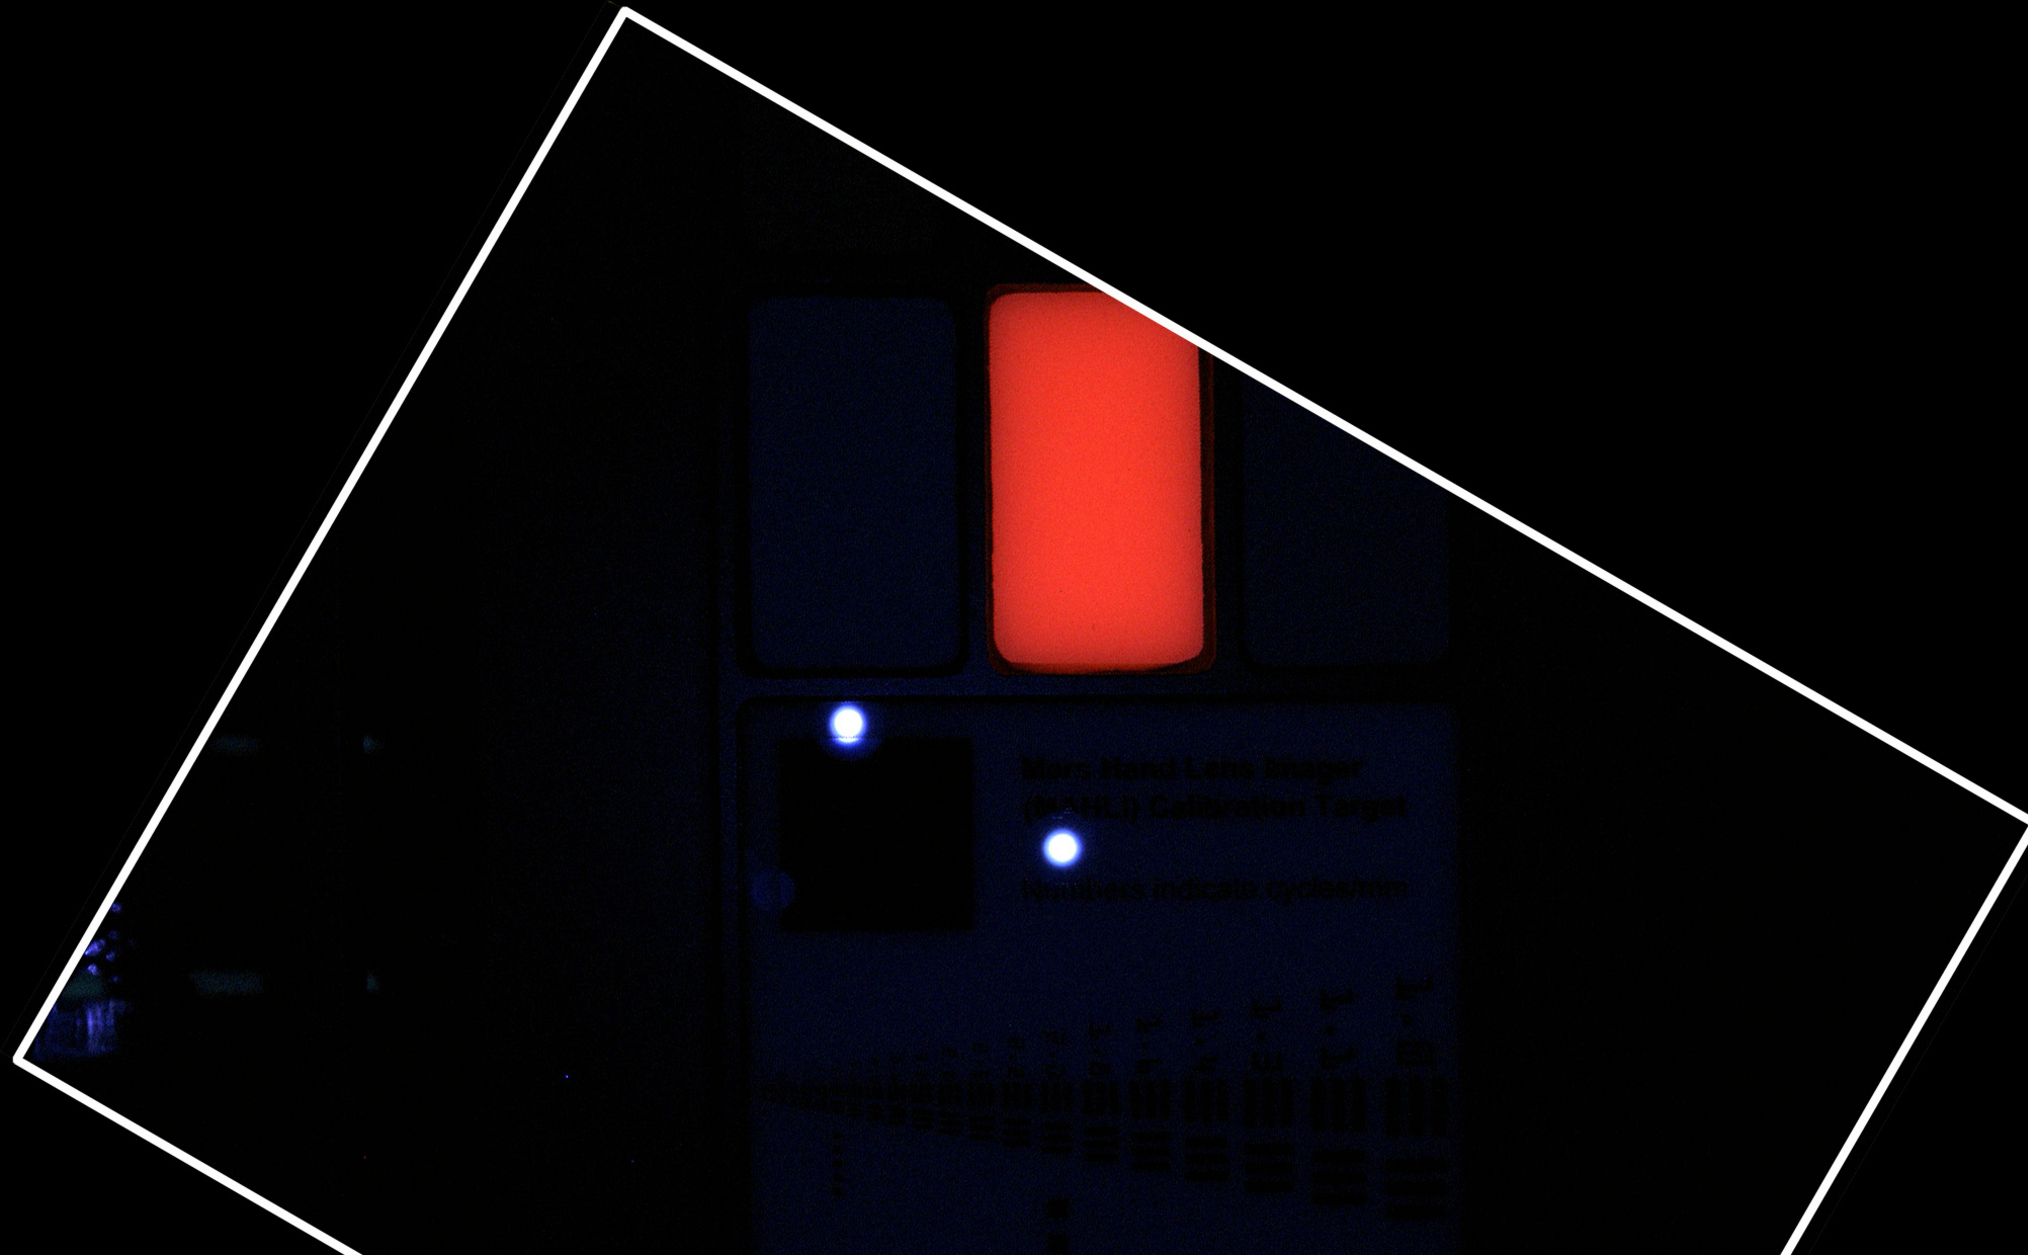 During pre-flight testing in March 2011, the Mars Hand Lens Imager (MAHLI) camera on NASA's Mars rover Curiosity took this image of the MAHLI calibration target under illumination from MAHLI's two ultraviolet LEDs (light emitting diodes).